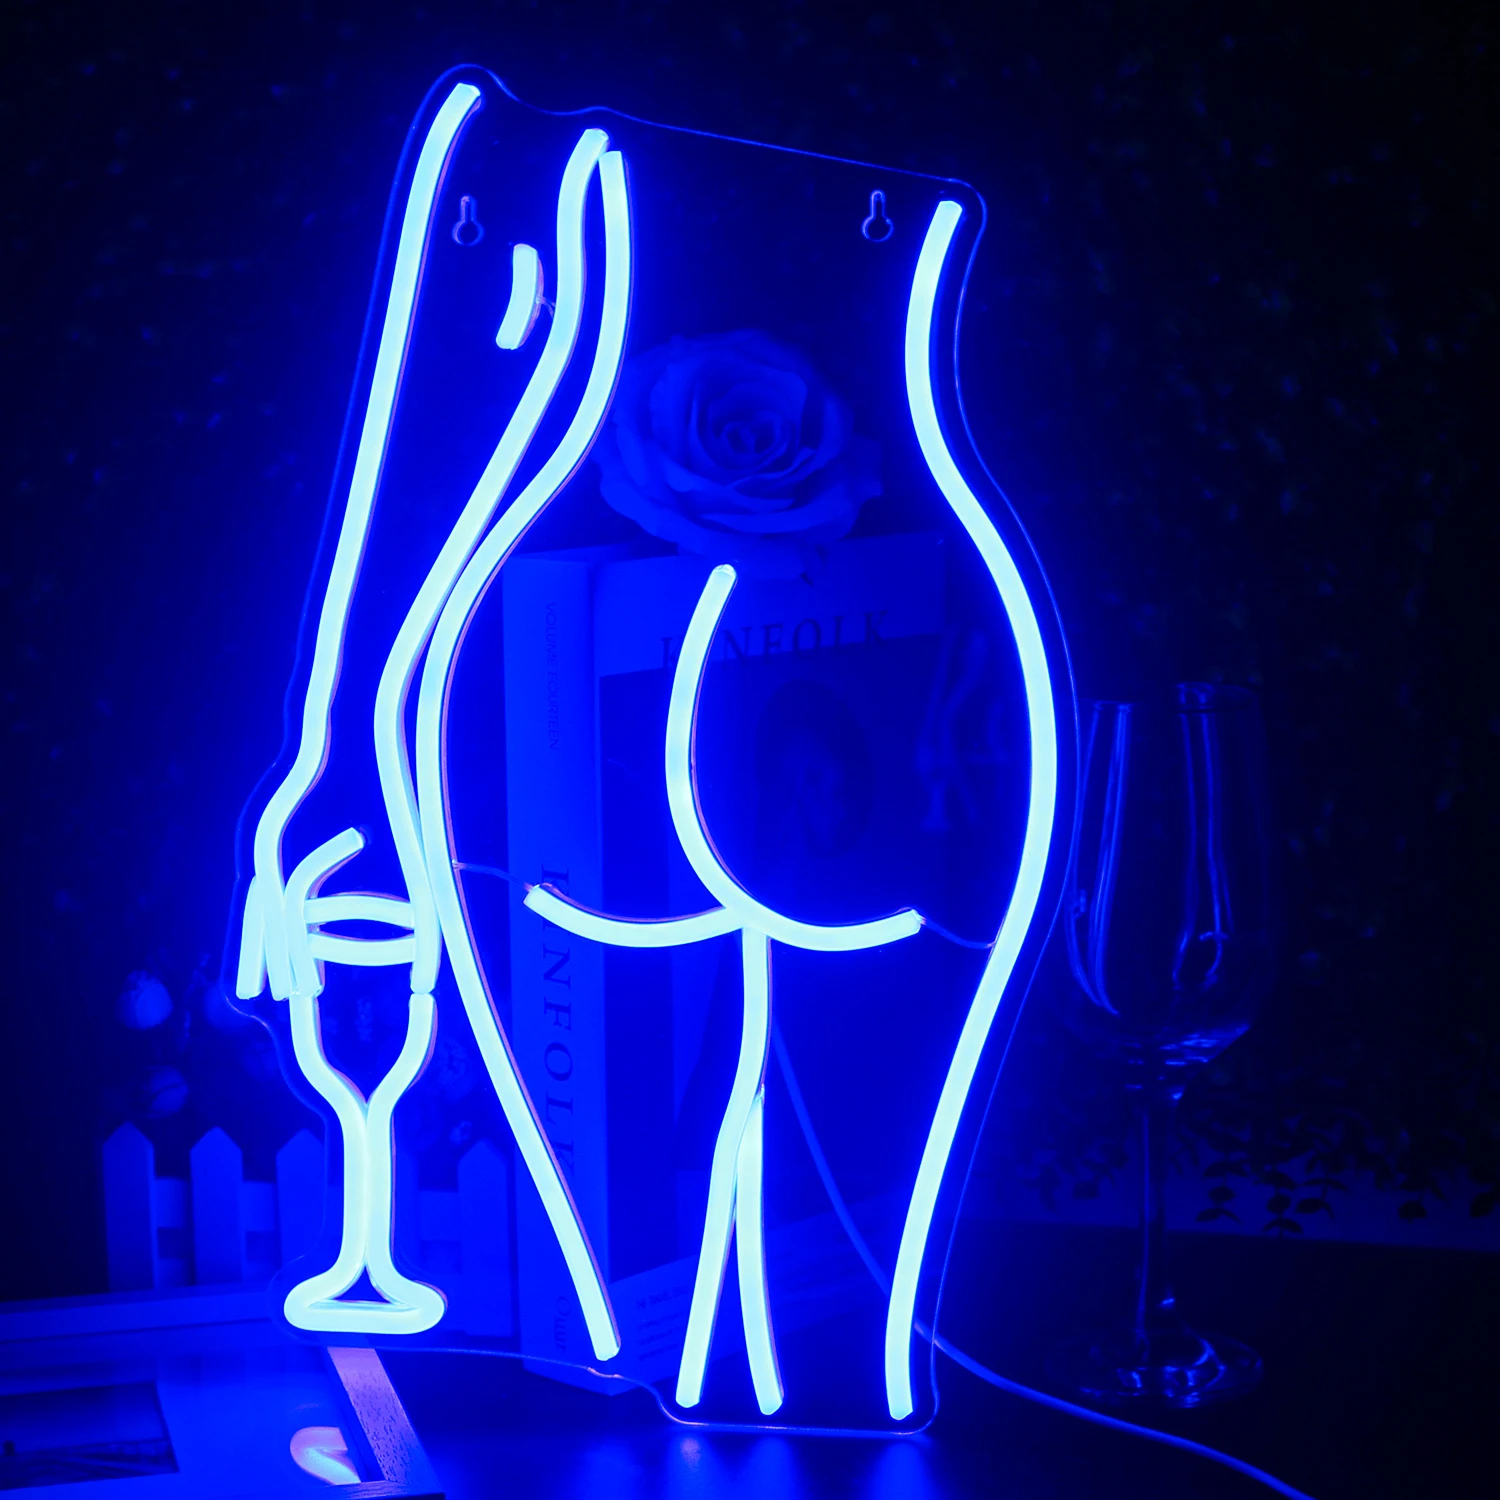 Ineonlife Sexy Lady Led Neon Light Sign Female Blue Led Neon For Bar Decor Light Home Room Decor Bar Party Wedding Wall Decor sexy lady back neon signs neon lady back wall sign art decorative signs lights for bar party hotel bright night neon light